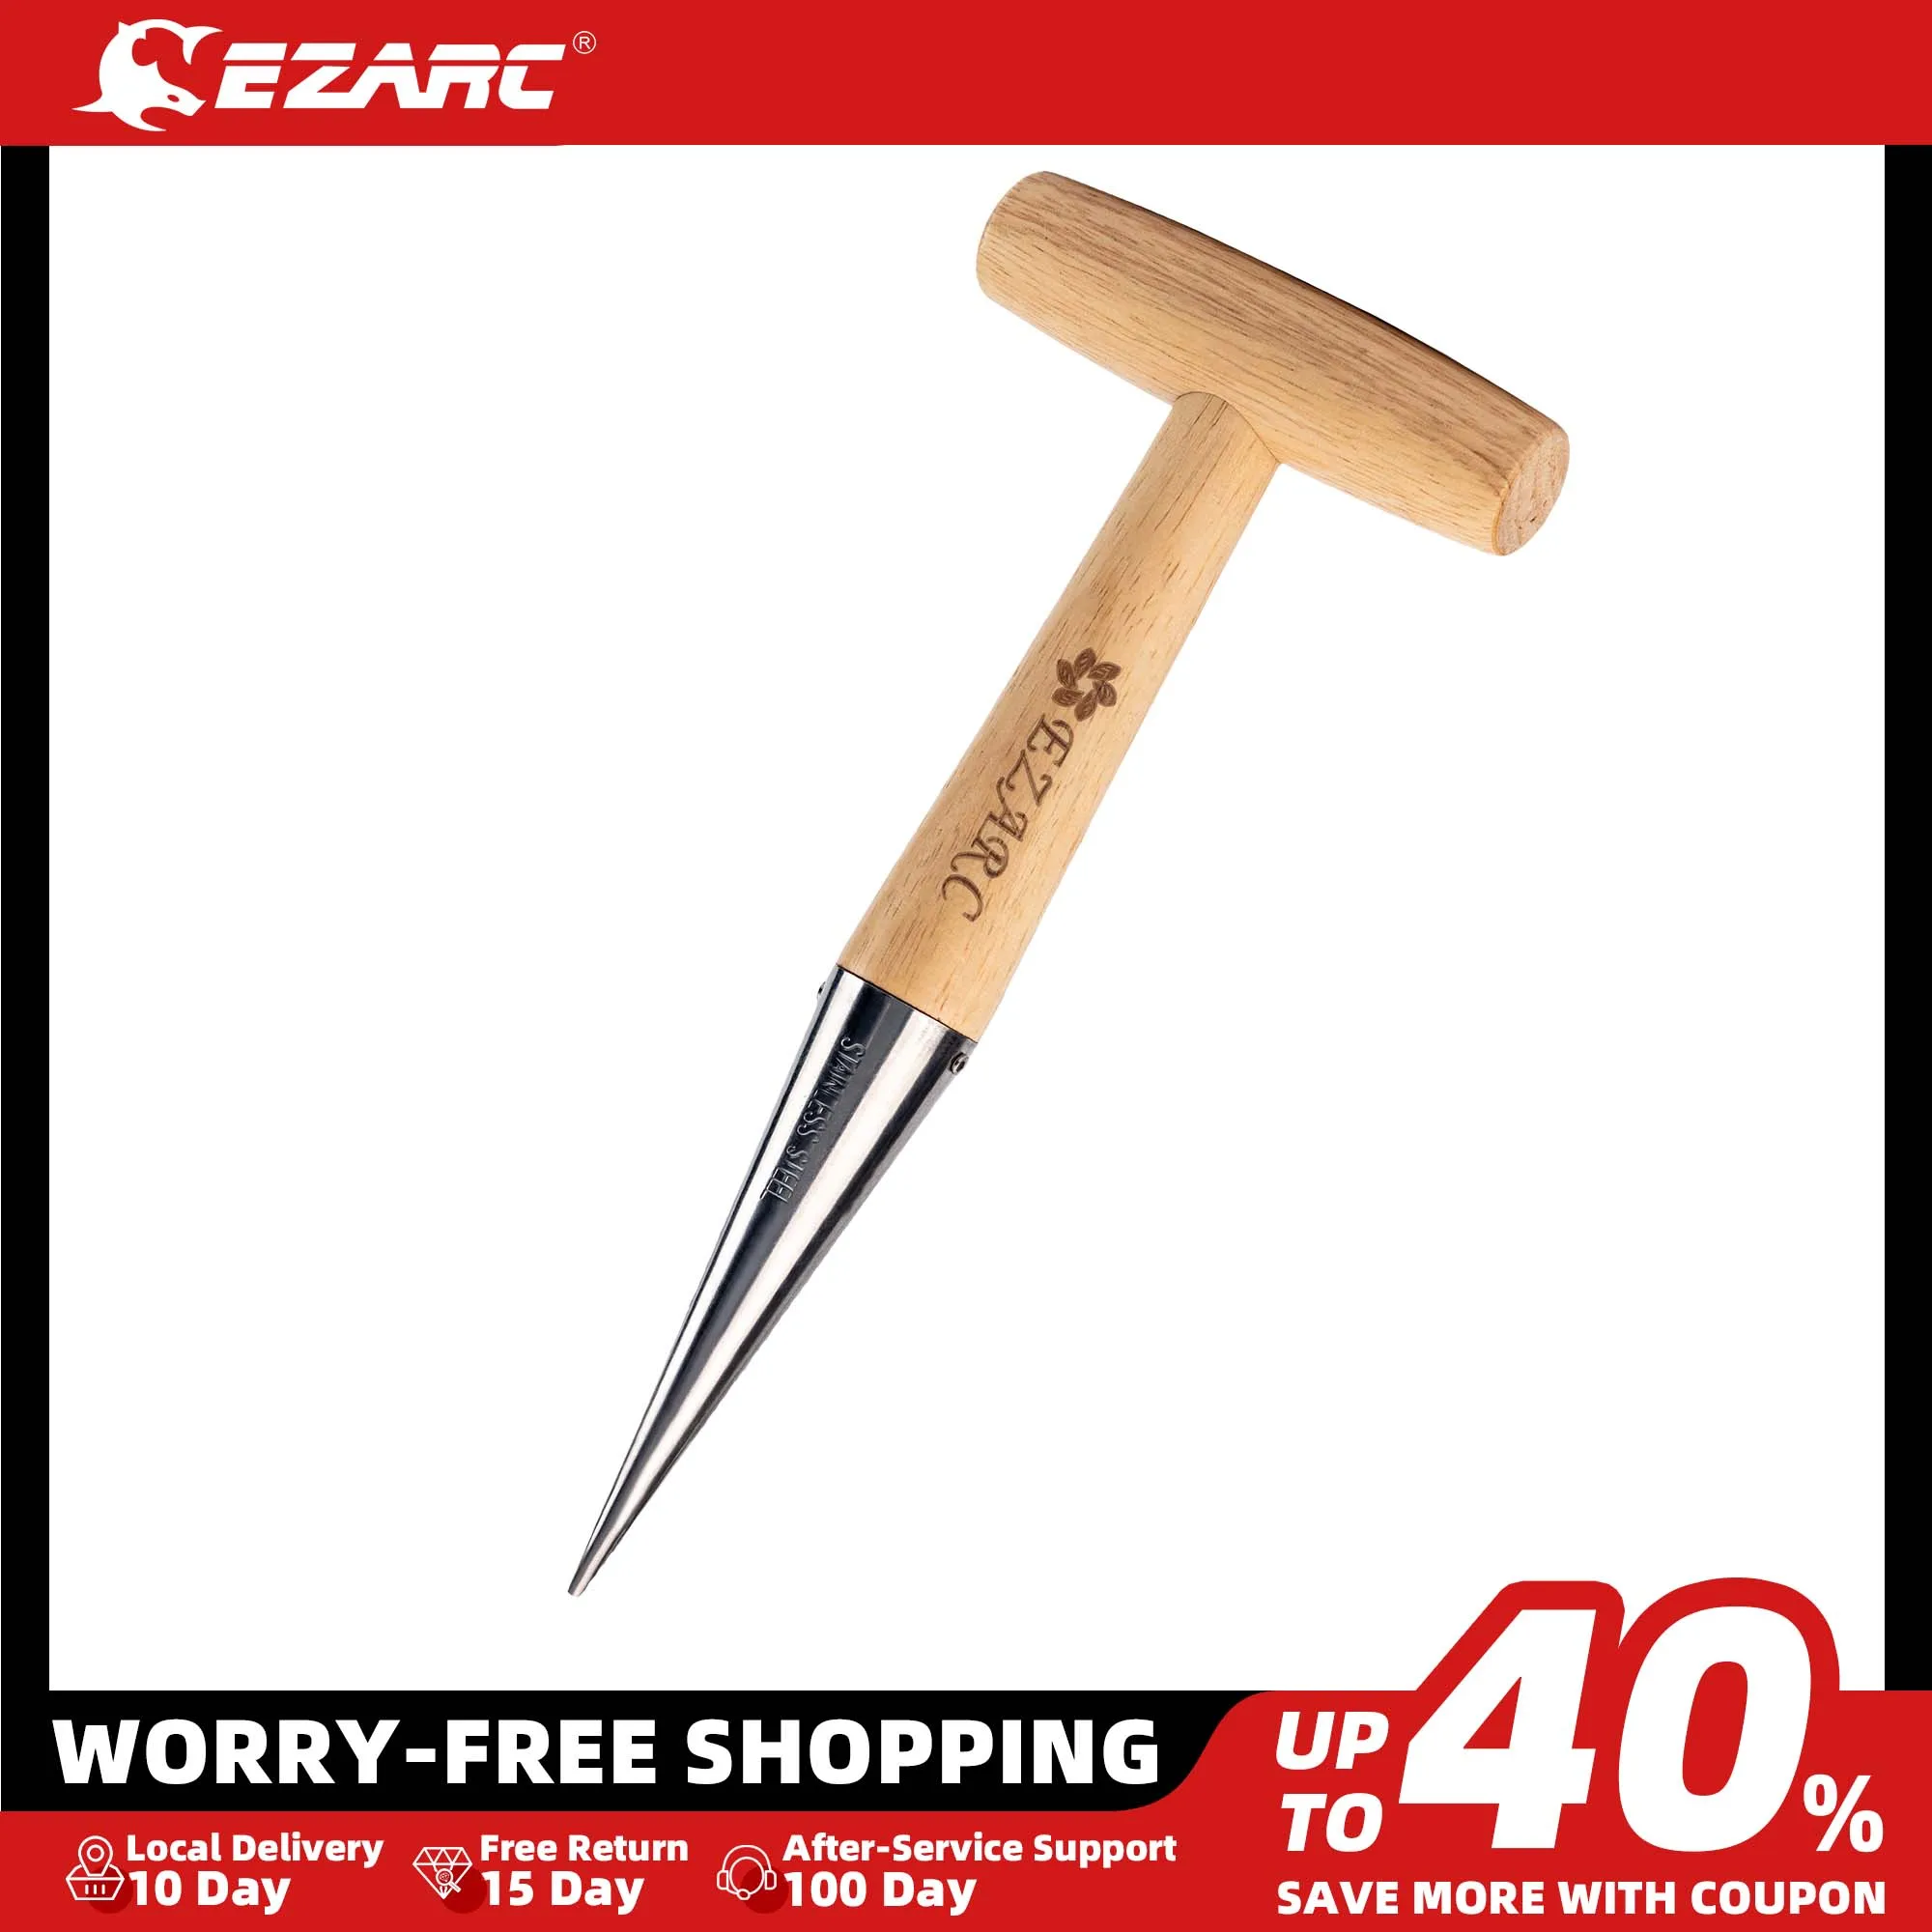 EZARC Hand Dibber with Wooden Handle, Stainless Steel Head - Lightweight Sturdy Hand Held Bulb Planter for Tulip Garden Tool